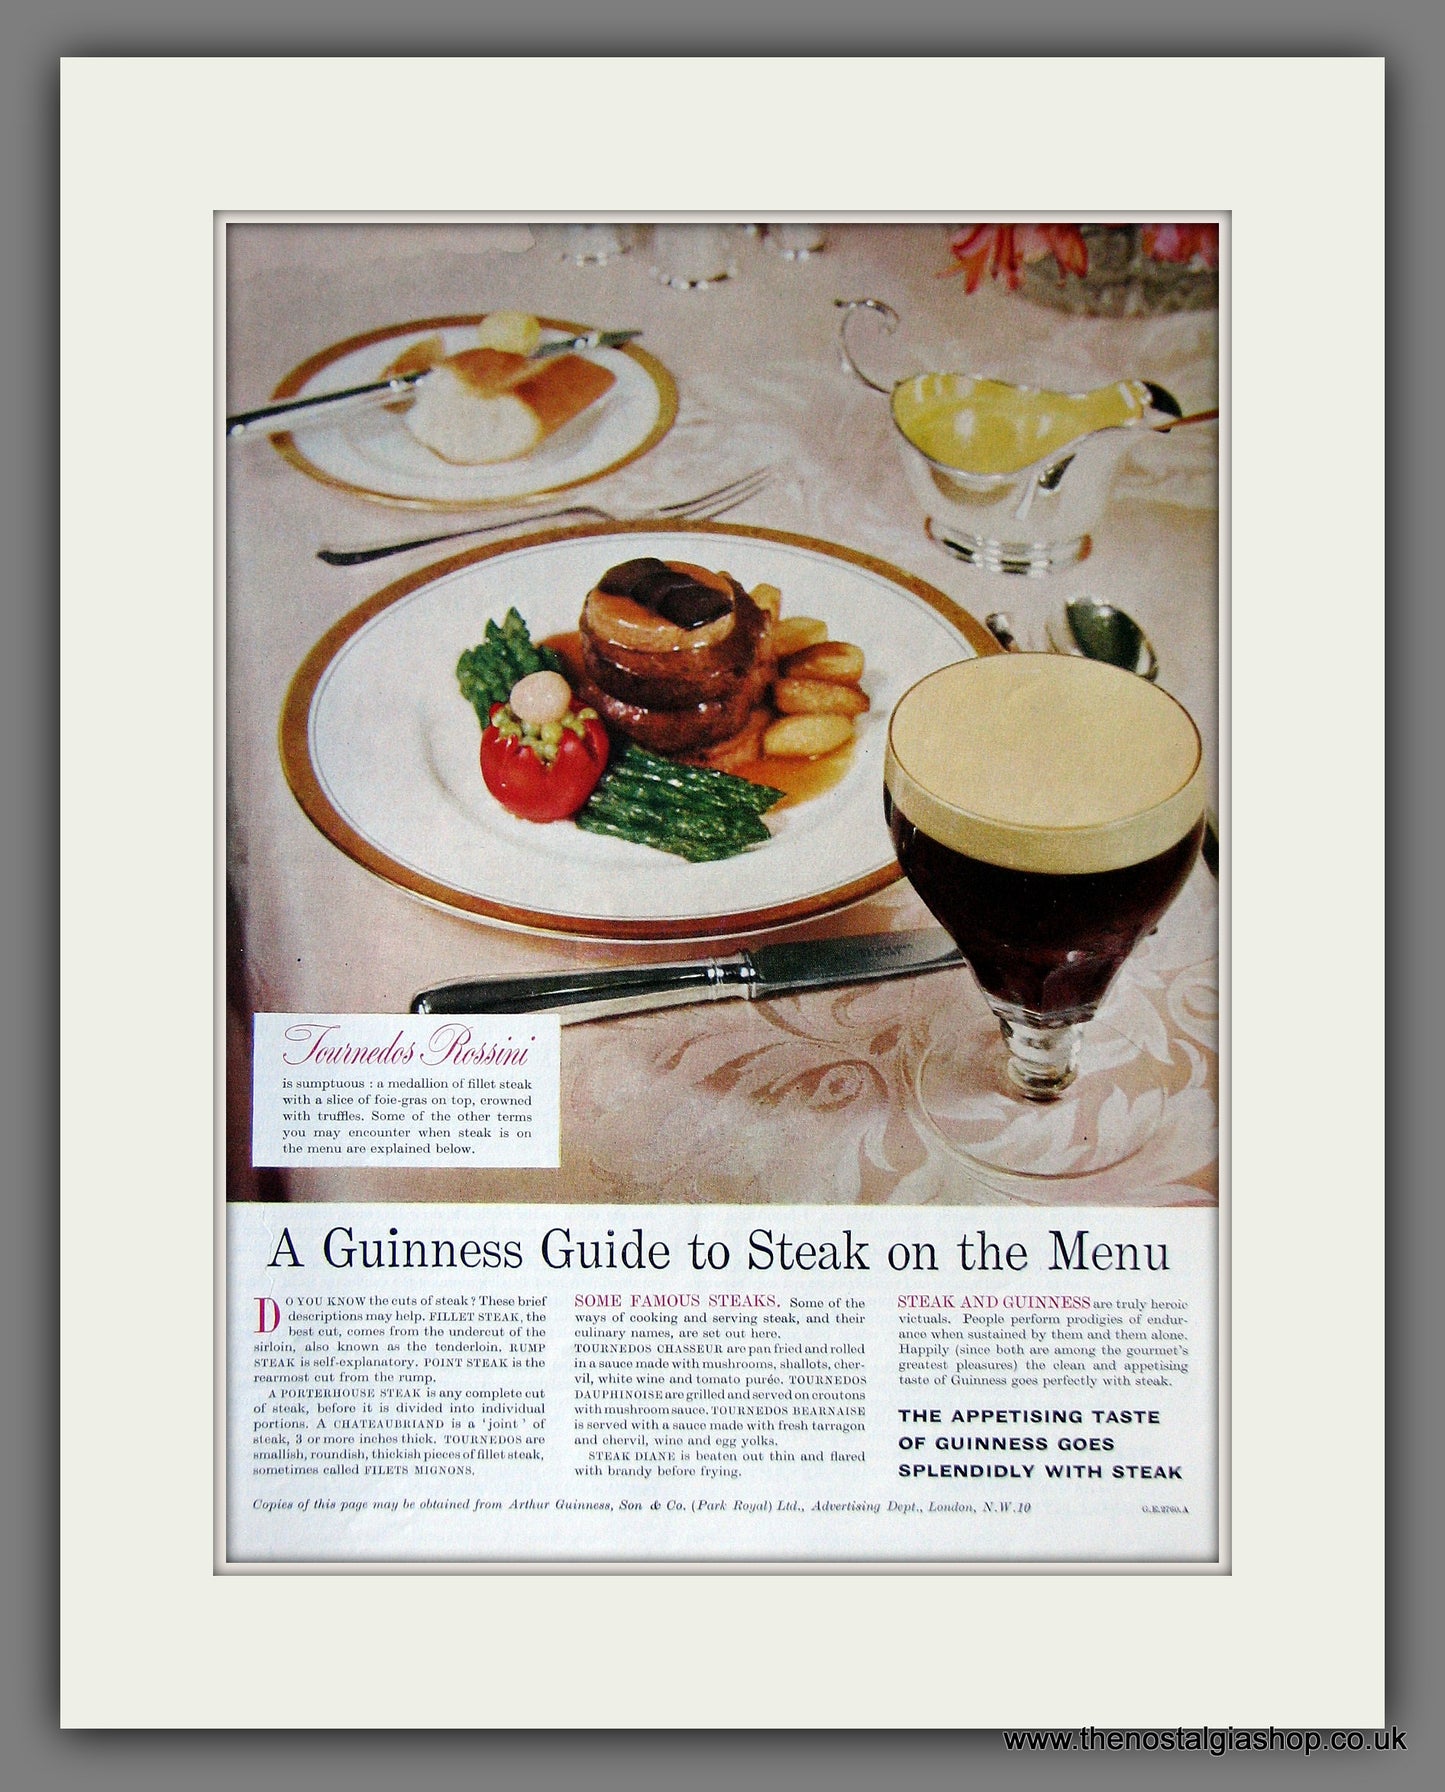 Guinness with Steak On The Menu. 1958 Original Advert  (ref AD56342)